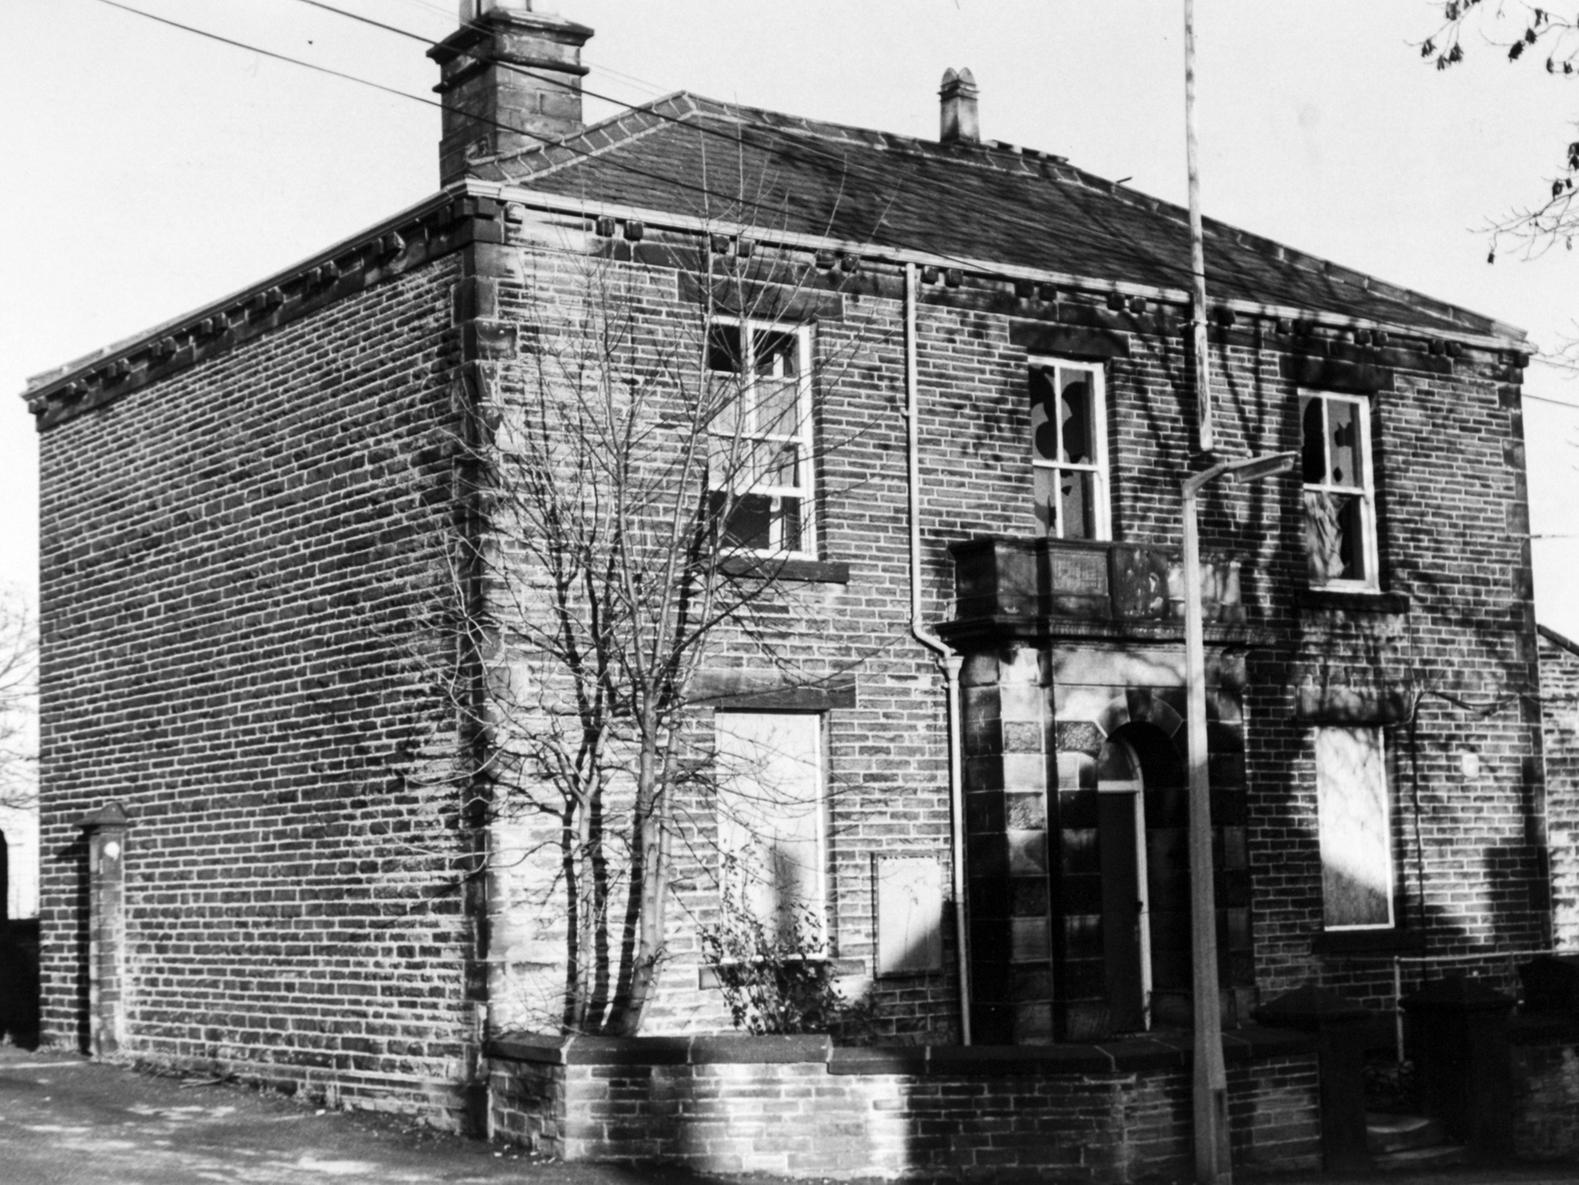 The old Pudsey Police station. a bit battered but a snip at 7,000 in the late 1970s.